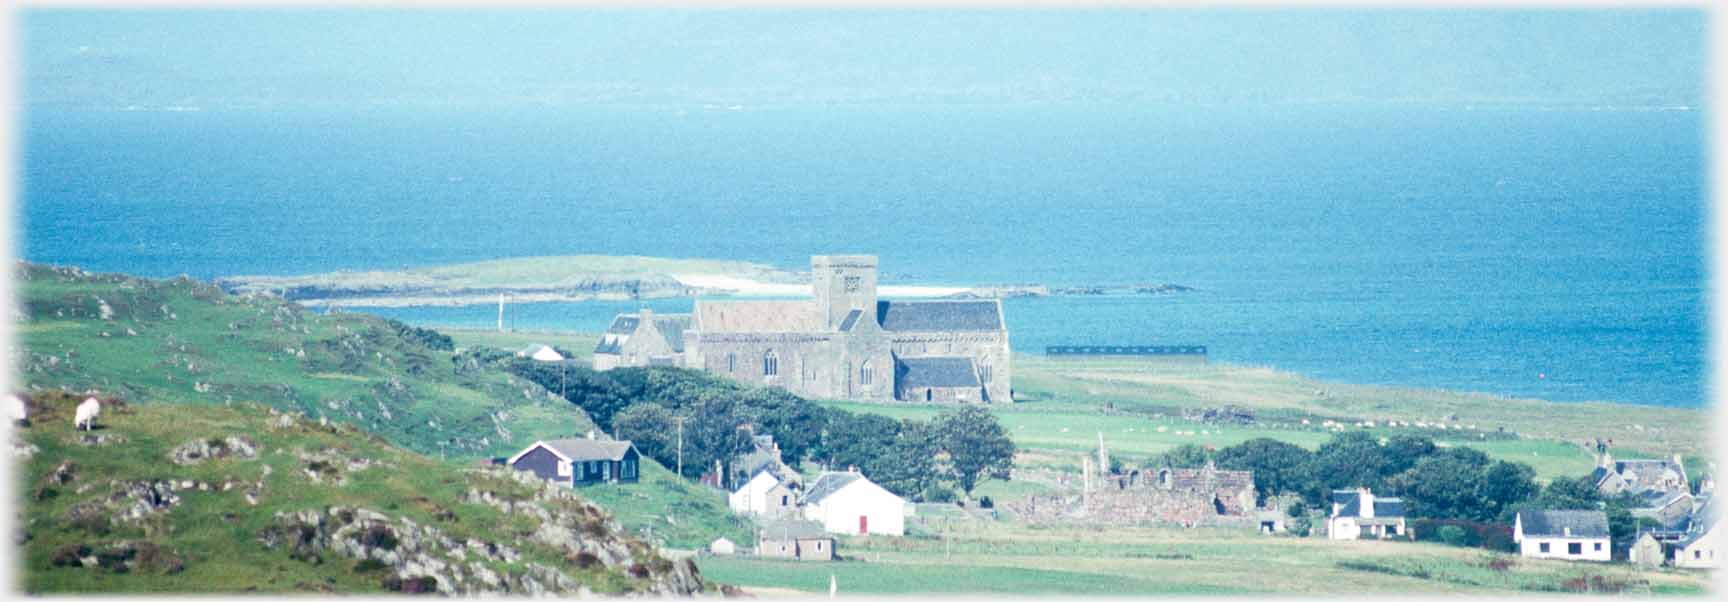 Church with houses in front and sea beyond.